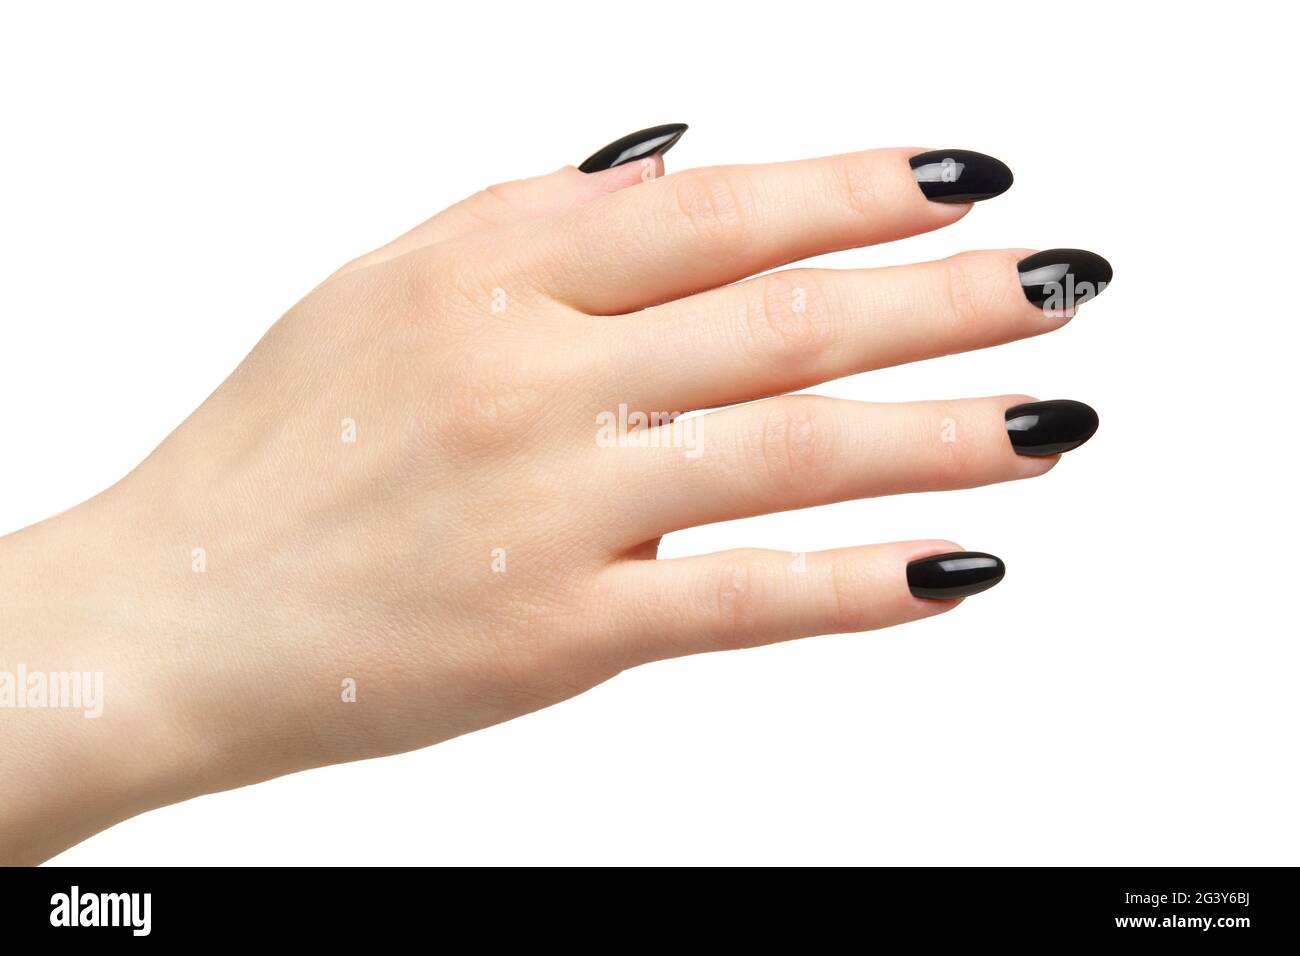 Nails And Manicure Concept Vector Illustration. Nail Polish In Female Hand  Royalty Free SVG, Cliparts, Vectors, and Stock Illustration. Image  184399317.